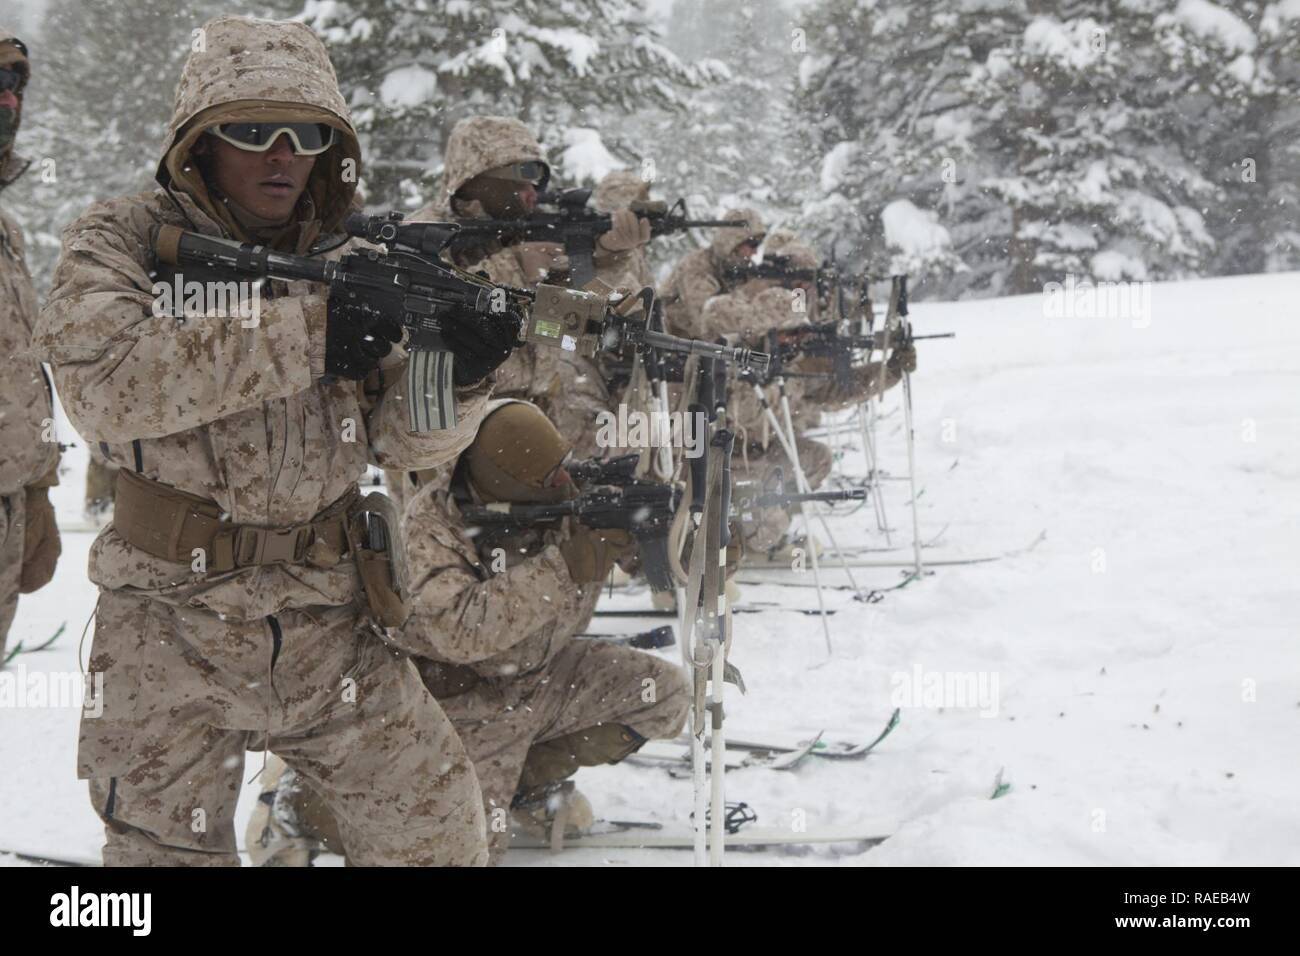 U.S. Marines with 2nd Battalion, 2nd Marine Regiment (2/2), conduct a live fire range exercise during a month-long Deployment for Training (DFT), at the Marine Corps Mountain Warfare Training Center (MCMWTC), Bridgeport, CA., Jan. 22, 2017. The Marines of 2/2 participated in a month-long DFT at MCMWTC to prepare them for the challenges of operating in cold and mountainous environments. Stock Photo